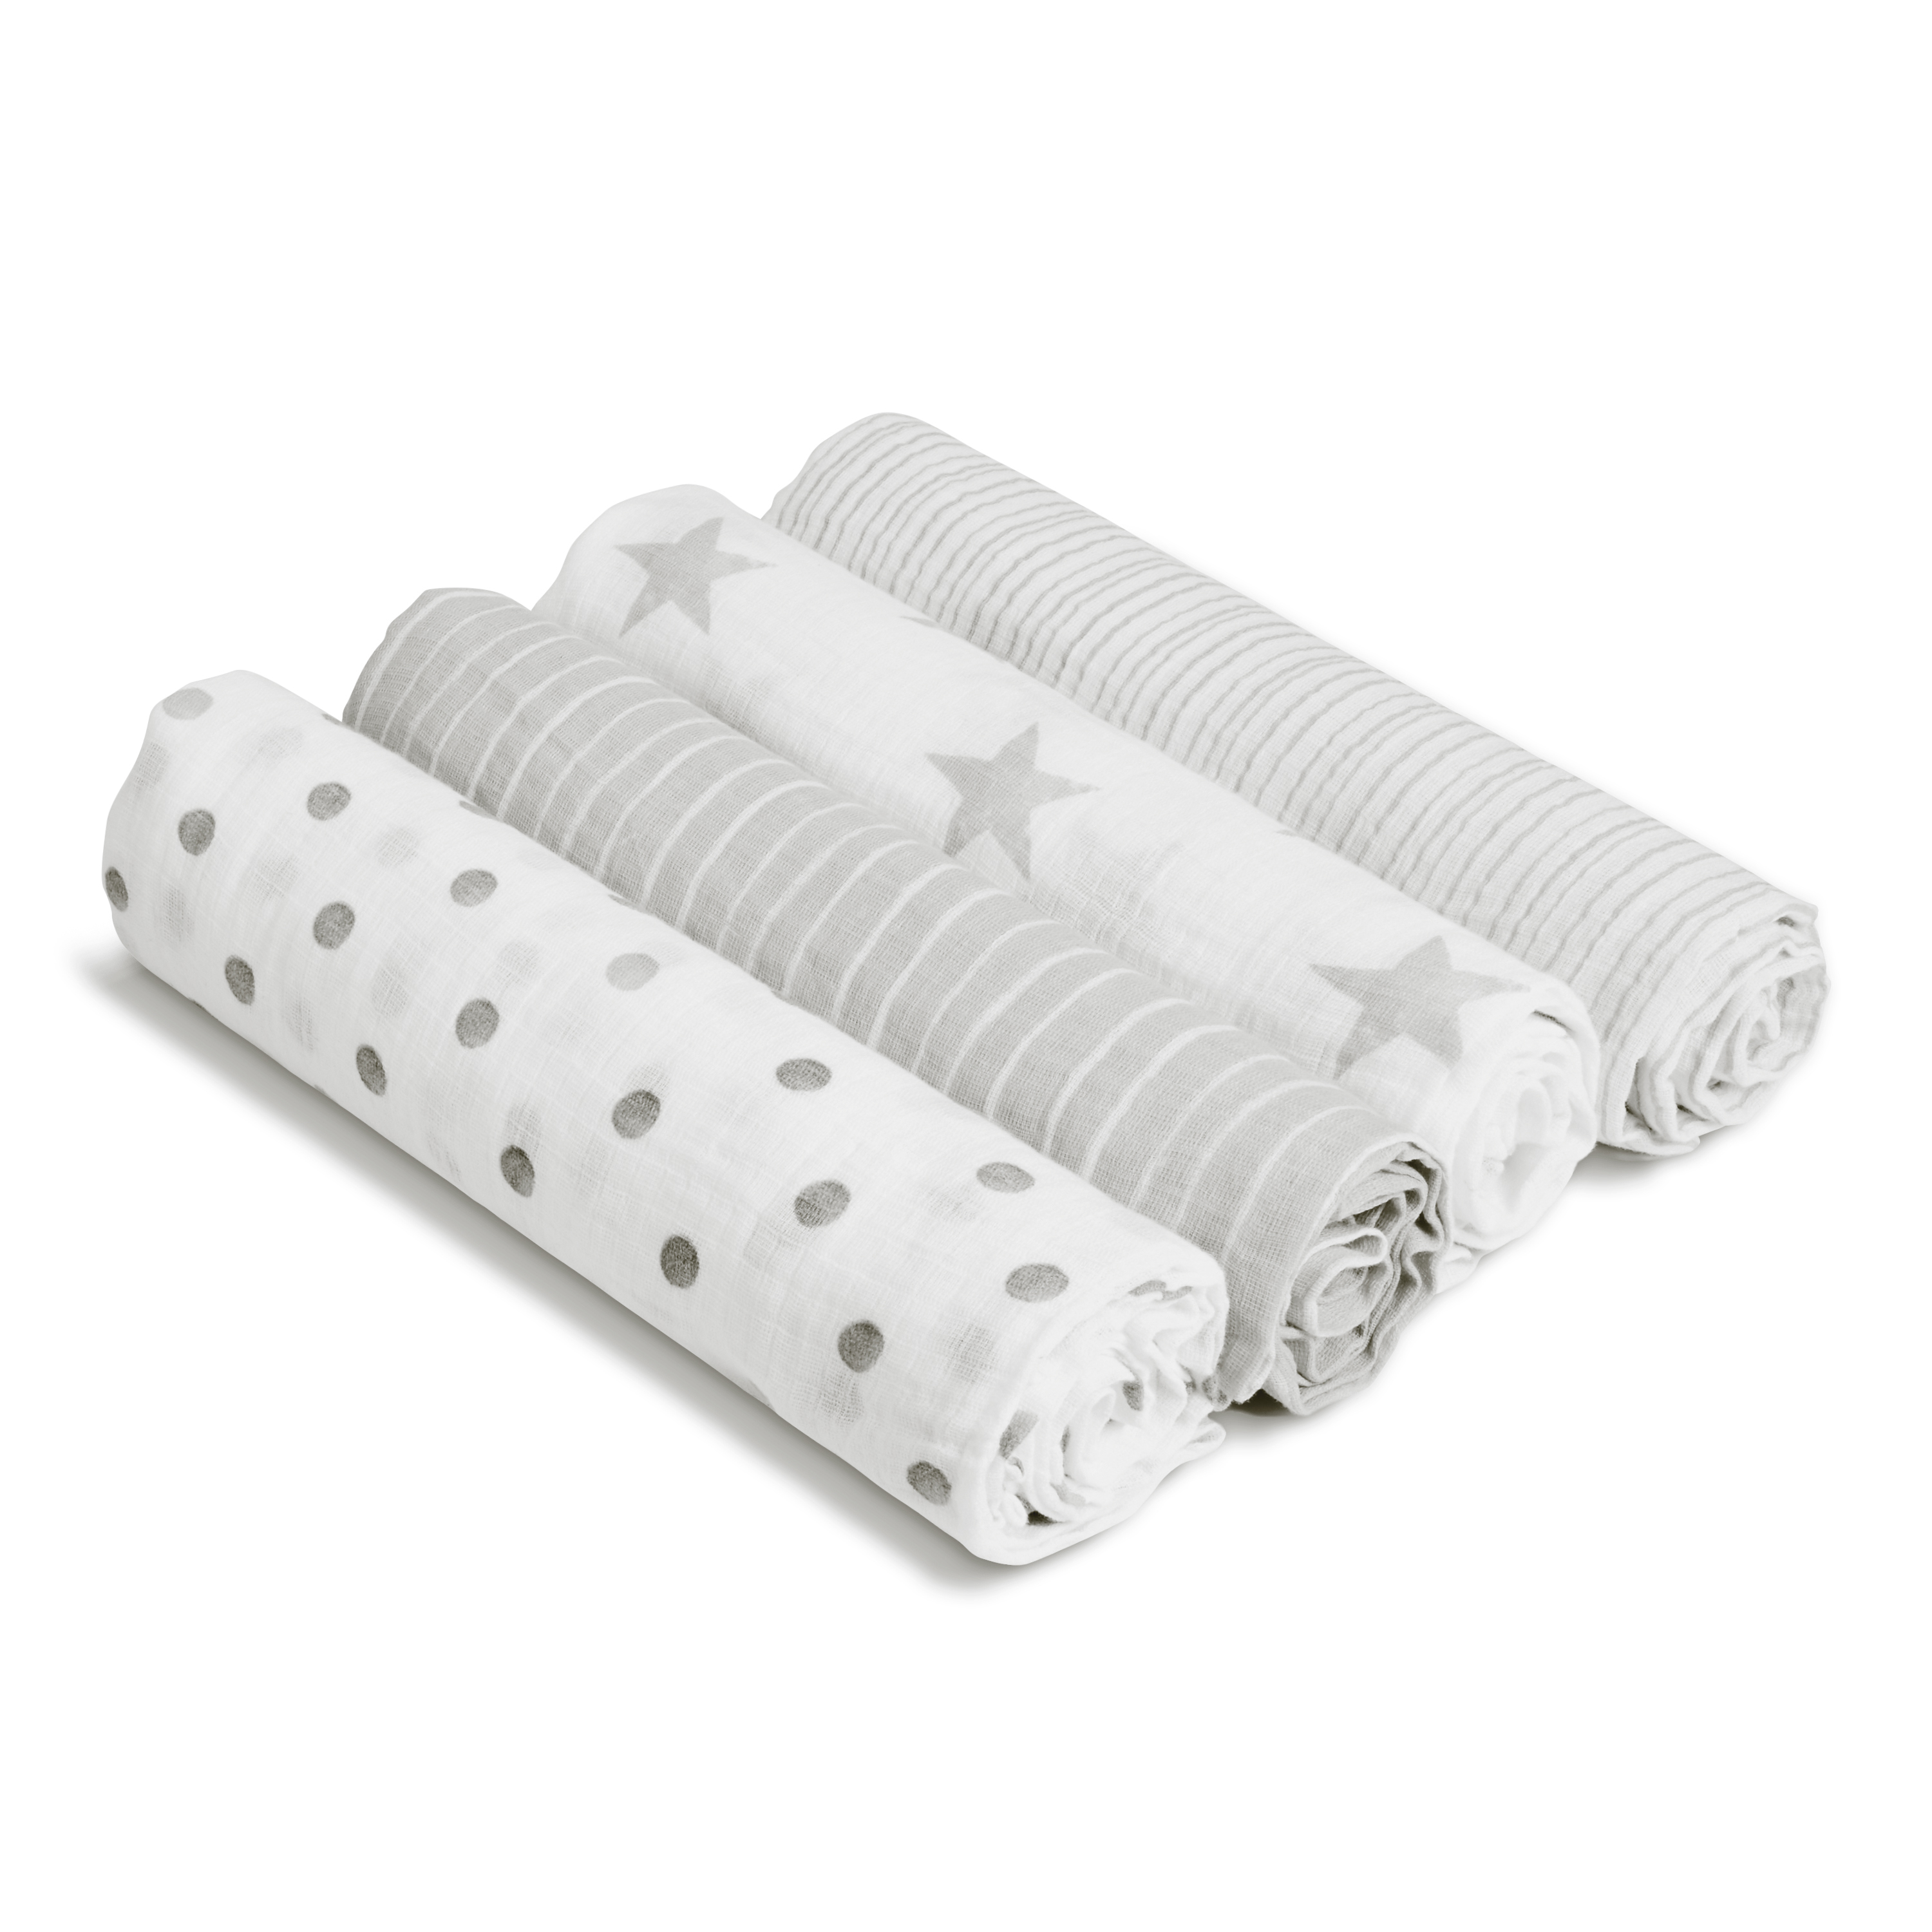 Aden + Anais™ Essentials, Cotton Muslin Swaddle Blanket, Dusty, Unisex, Infants, 4-Pack - image 1 of 6